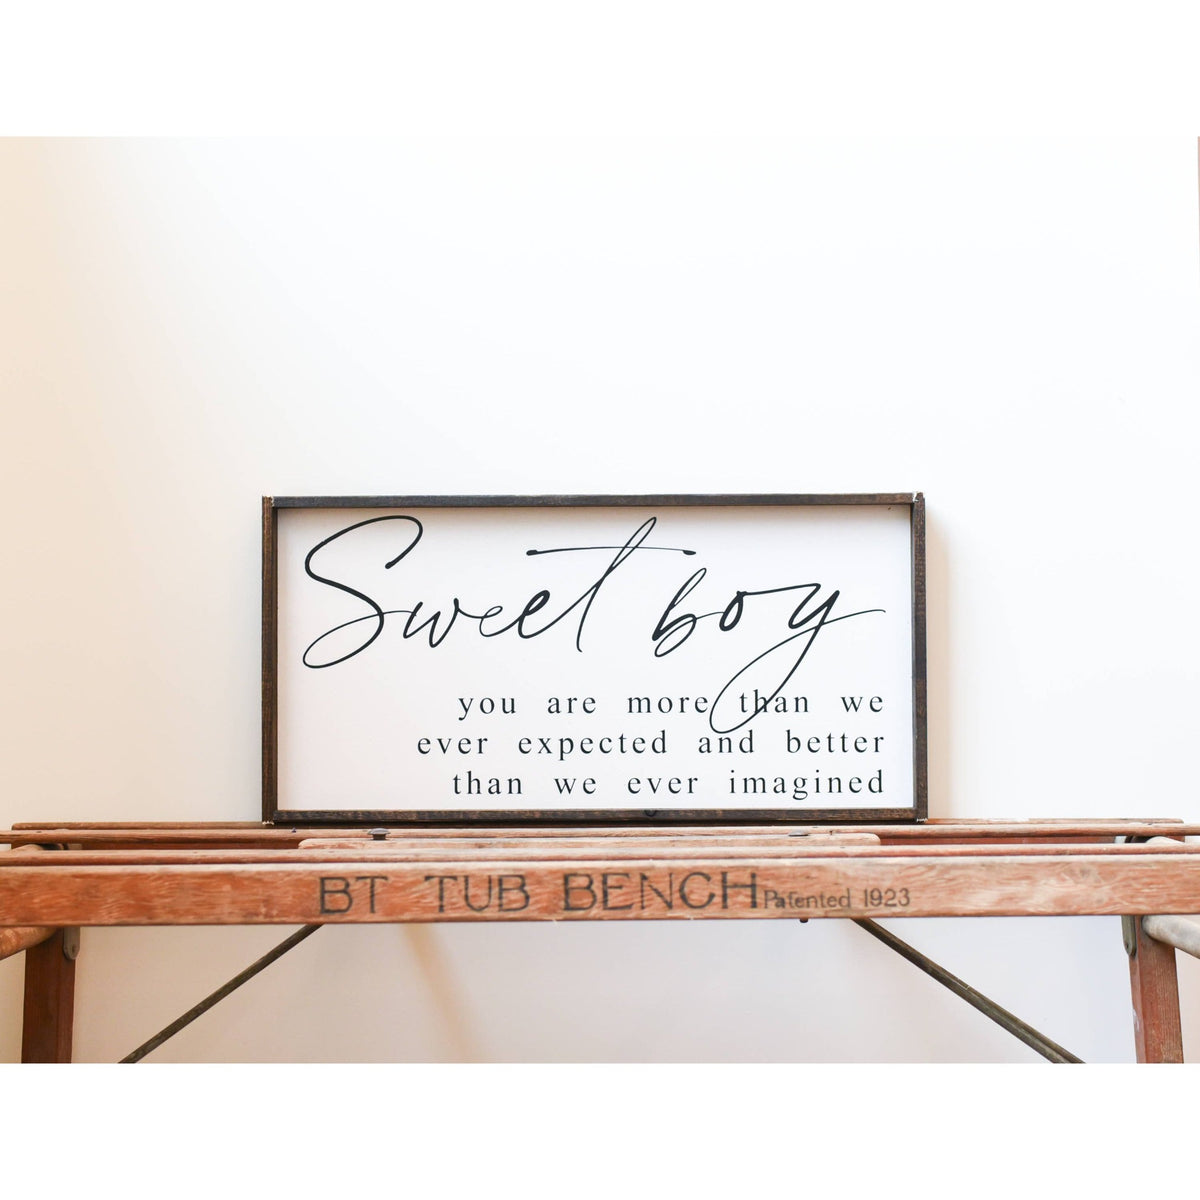 Sweet Boy Wood Sign - SLATE Boutique & Gifts